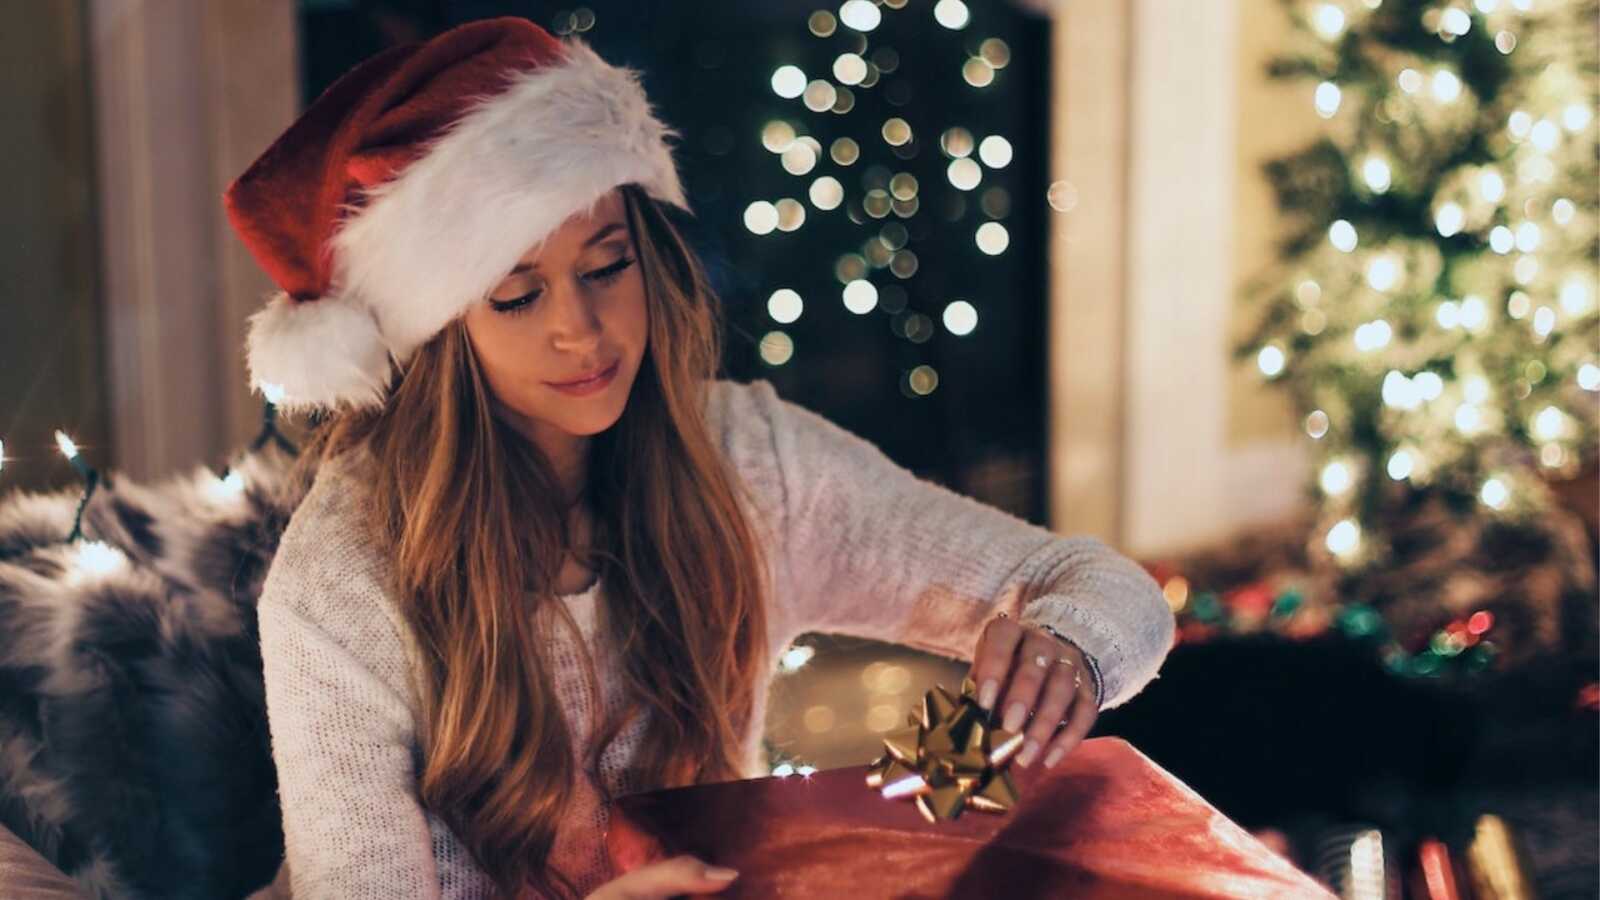 woman sits in front of Christmas tree in Santa hat, wrapping presents